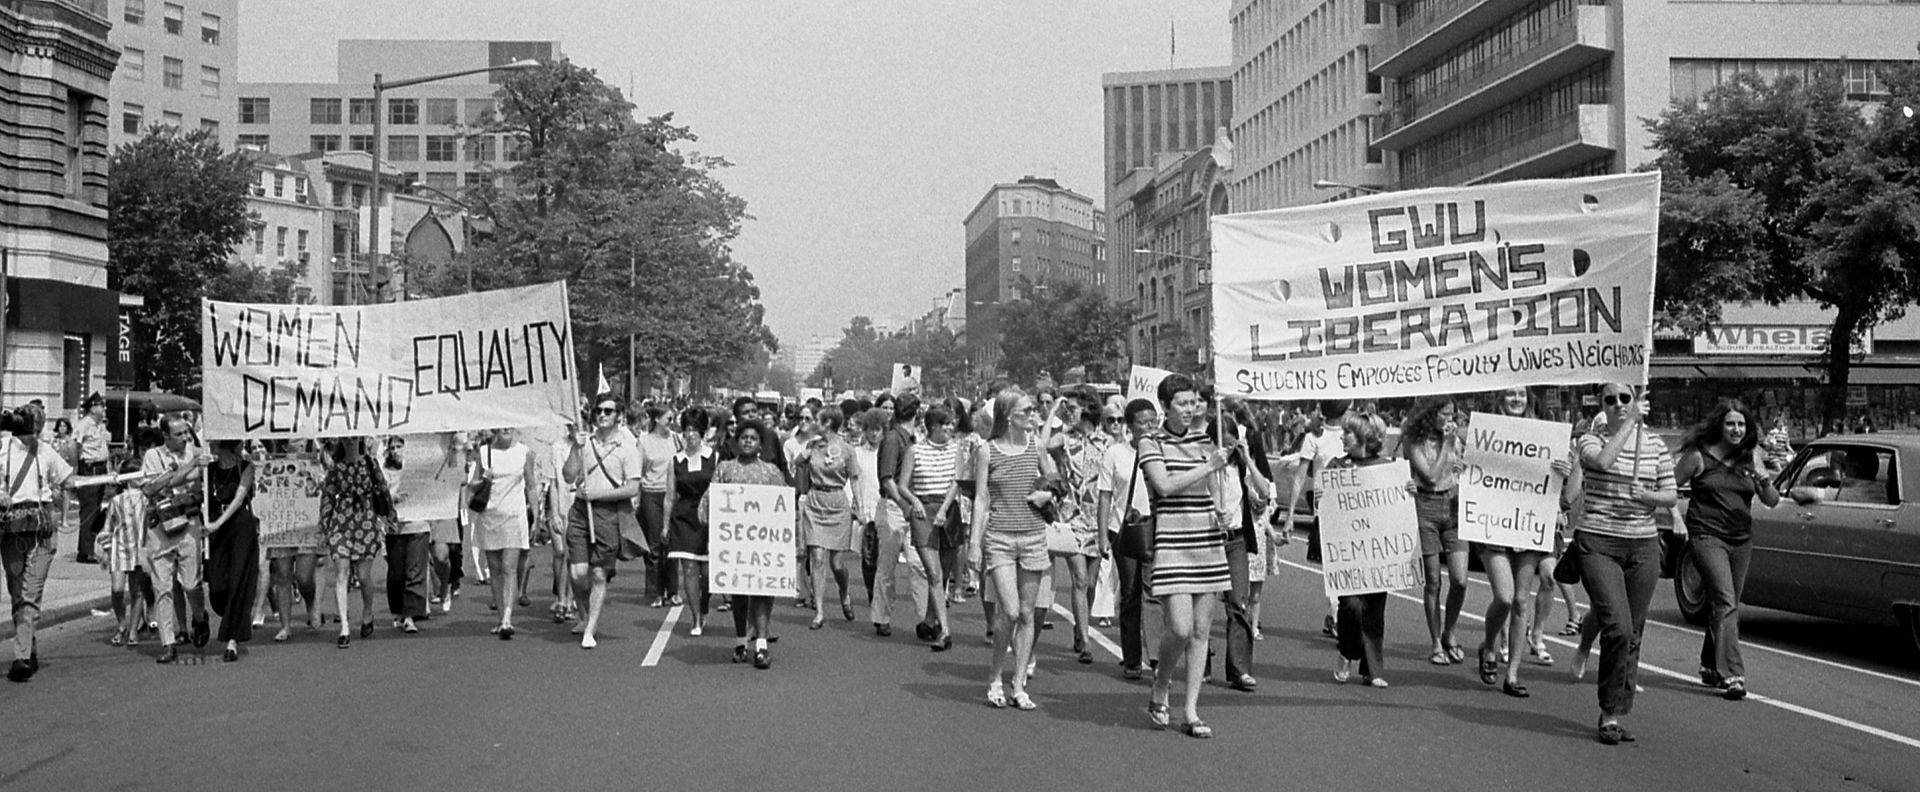 Women’s Liberation March from Farragut Square to Lafayette, August 1970